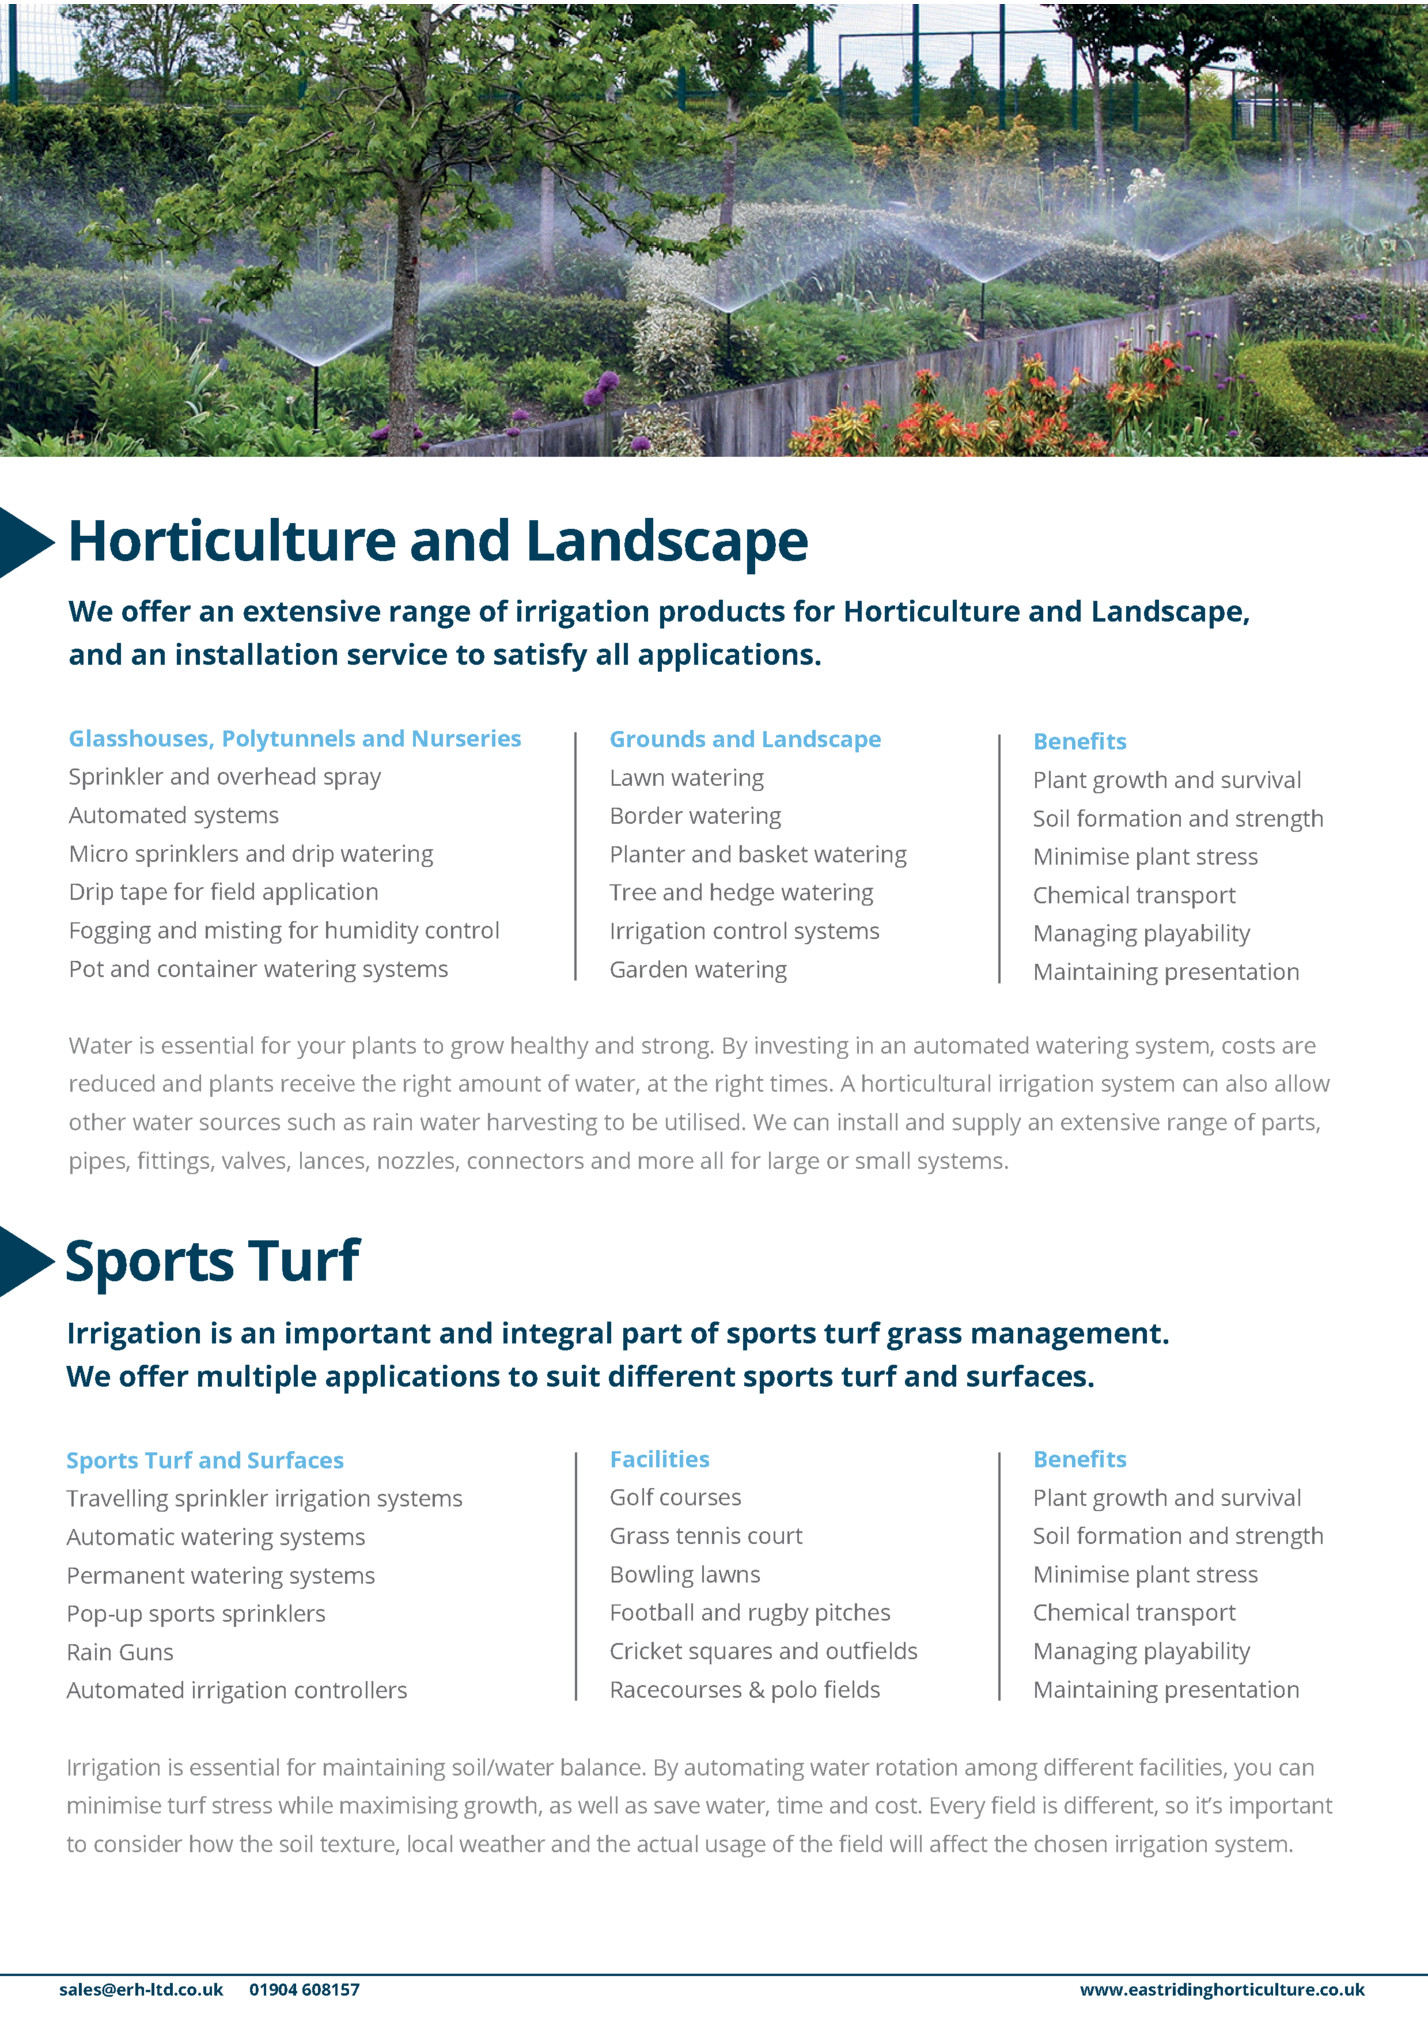 Horticulture and Landscape